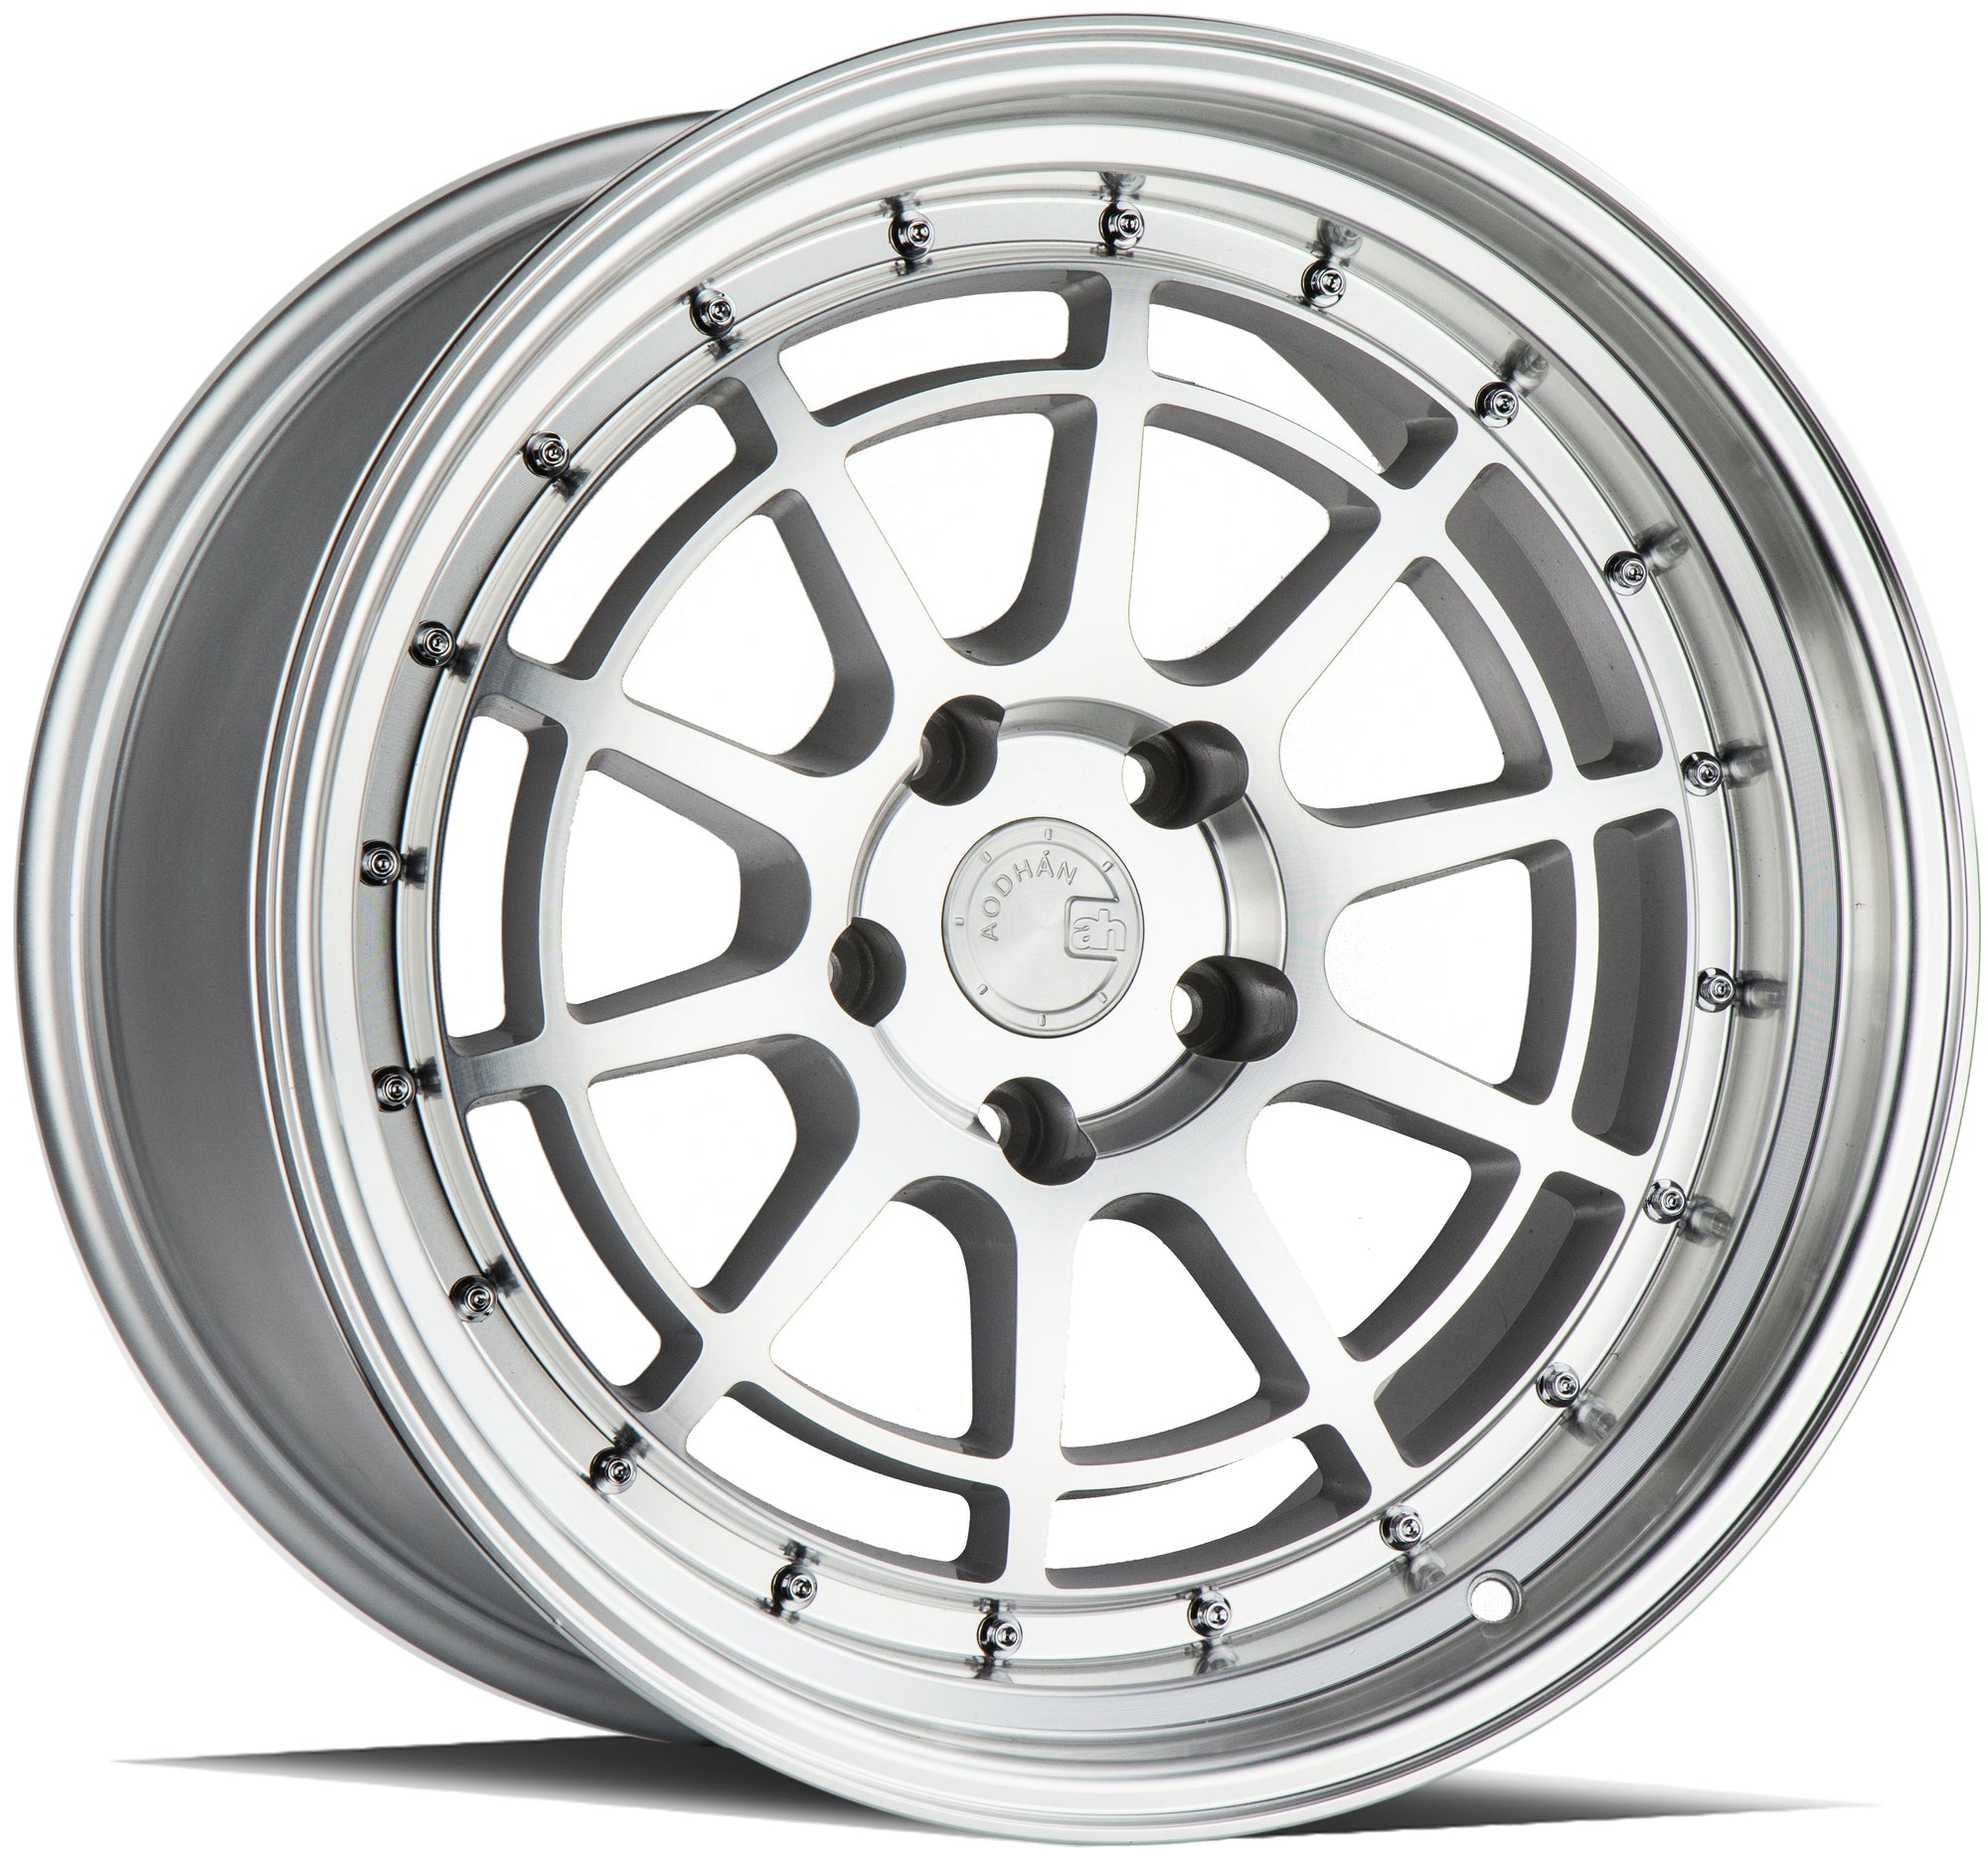 Aodhan AH04 18x10.5 5x120 +35 Silver Machined Face And Lip